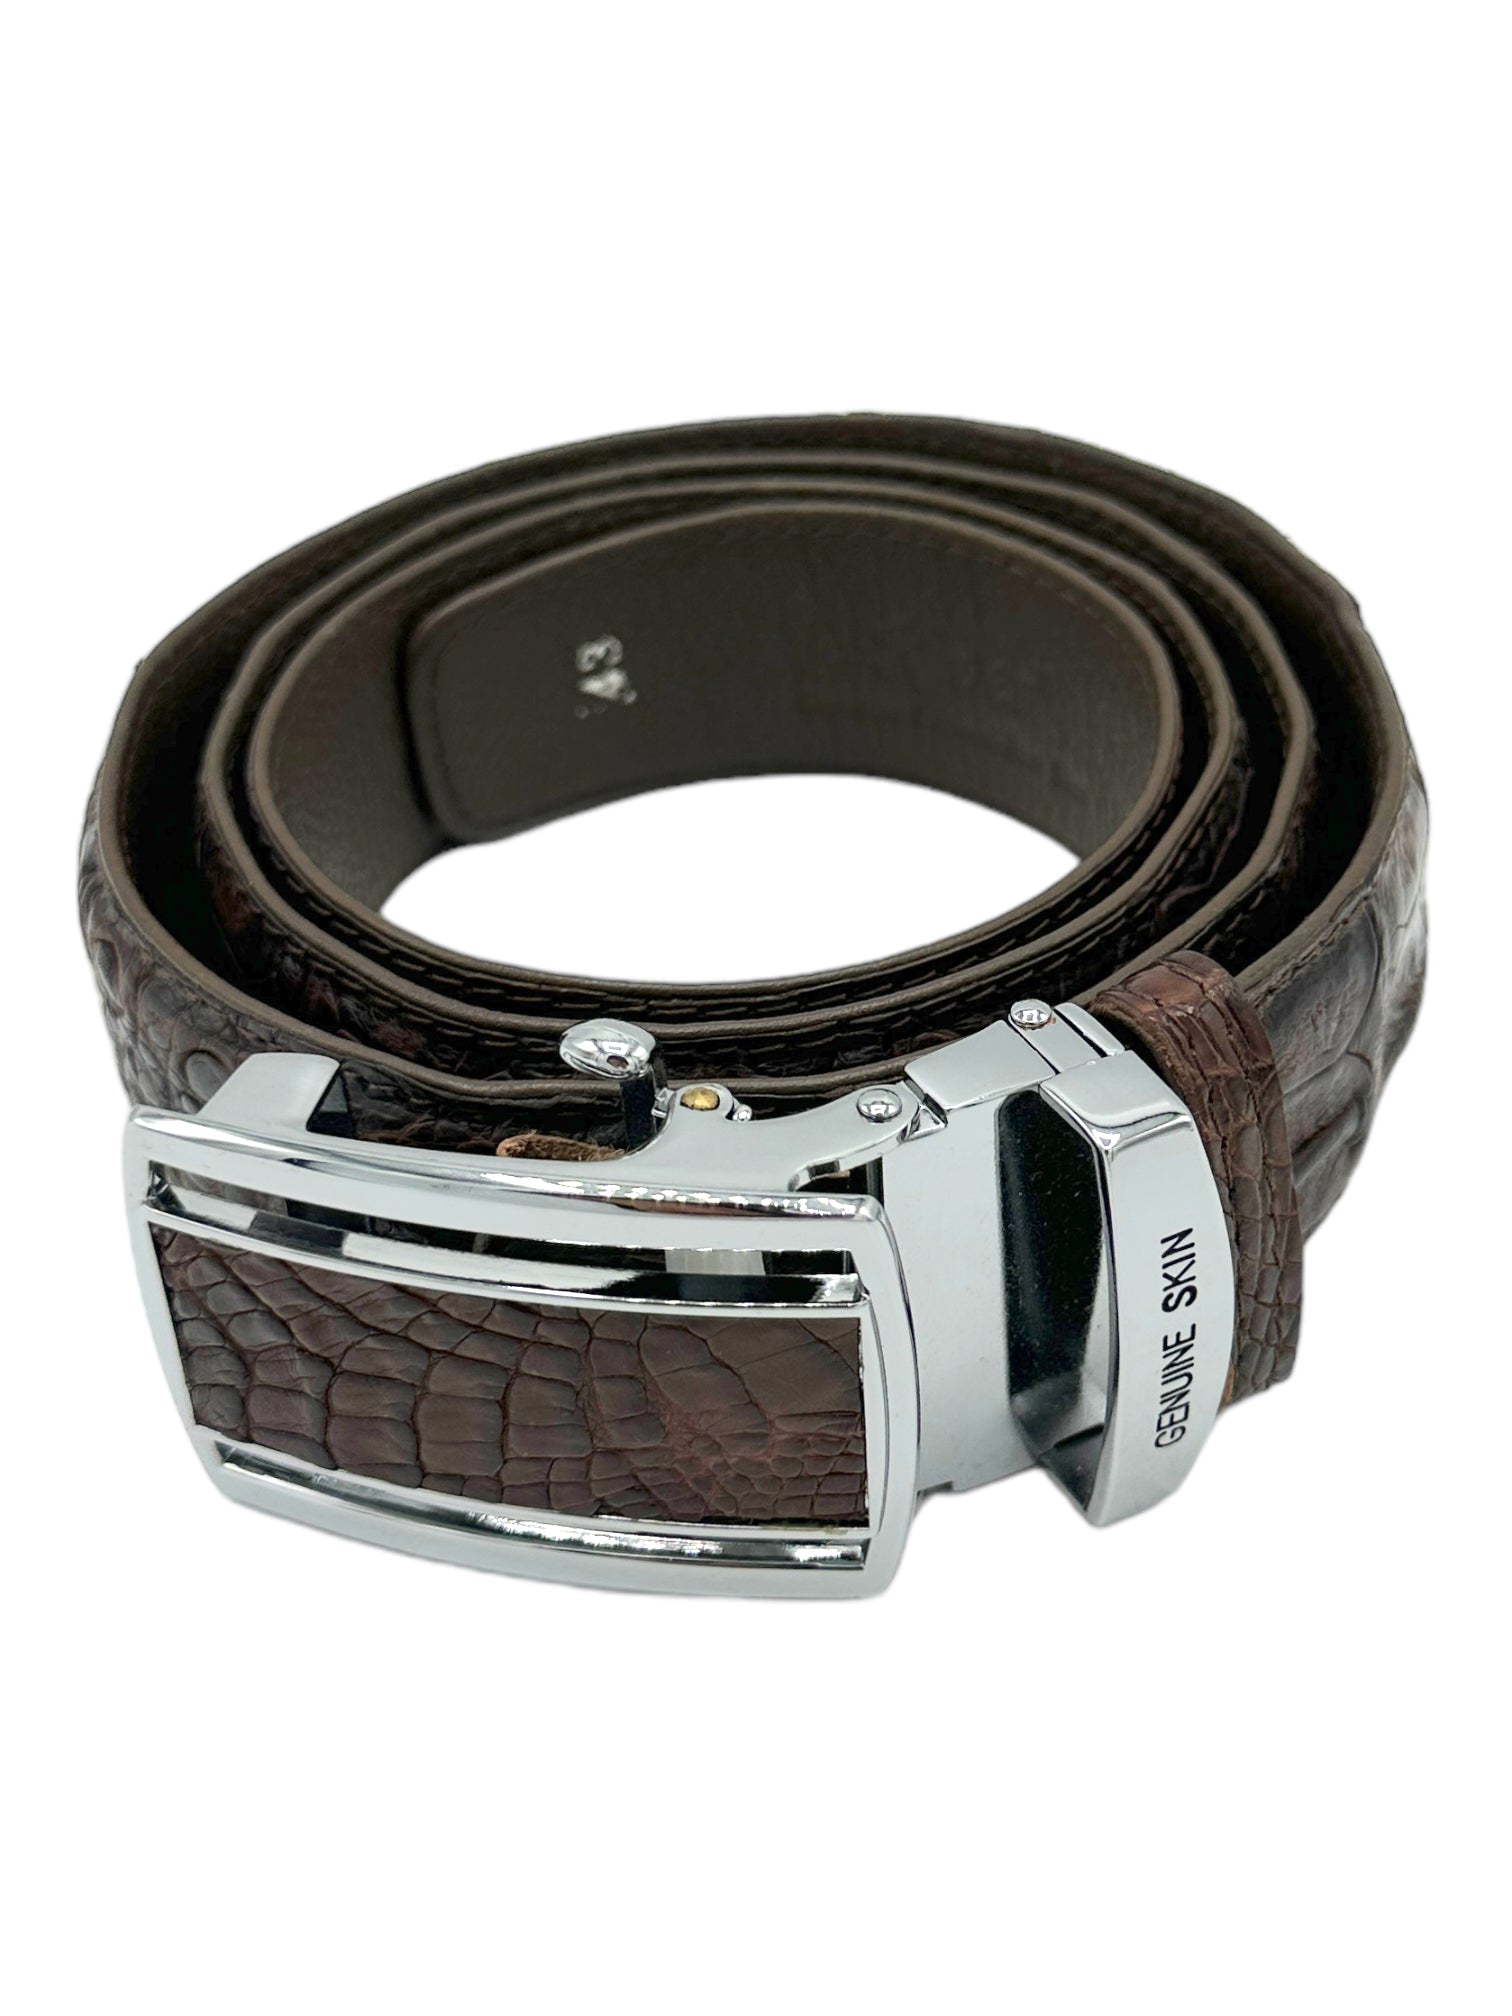 River Crocodile Skin Hornback Soft Skin Brown Belt - Genuine Design luxury consignment Calgary, Alberta, Canada New and pre-owned clothing, shoes, accessories.